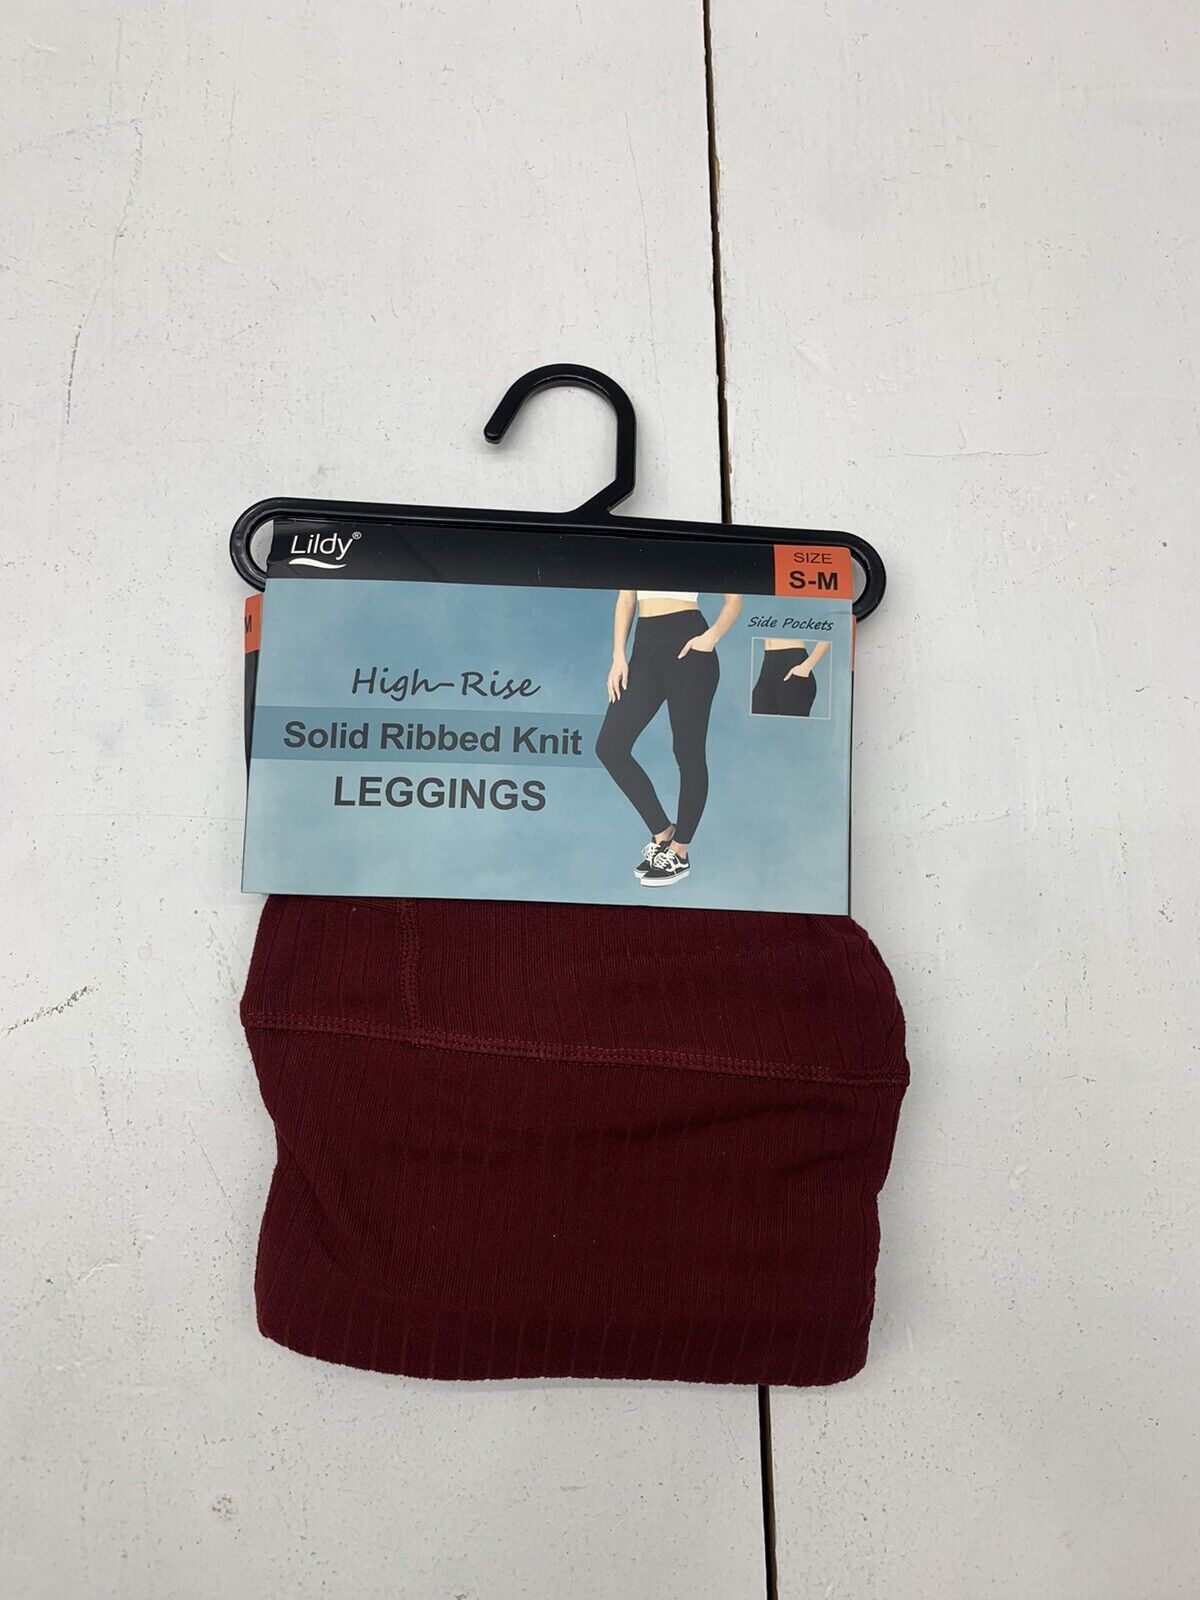 NEW Lildy High-Rise Solid Ribbed Knit Red Leggings Size S-M Stretch Po -  beyond exchange